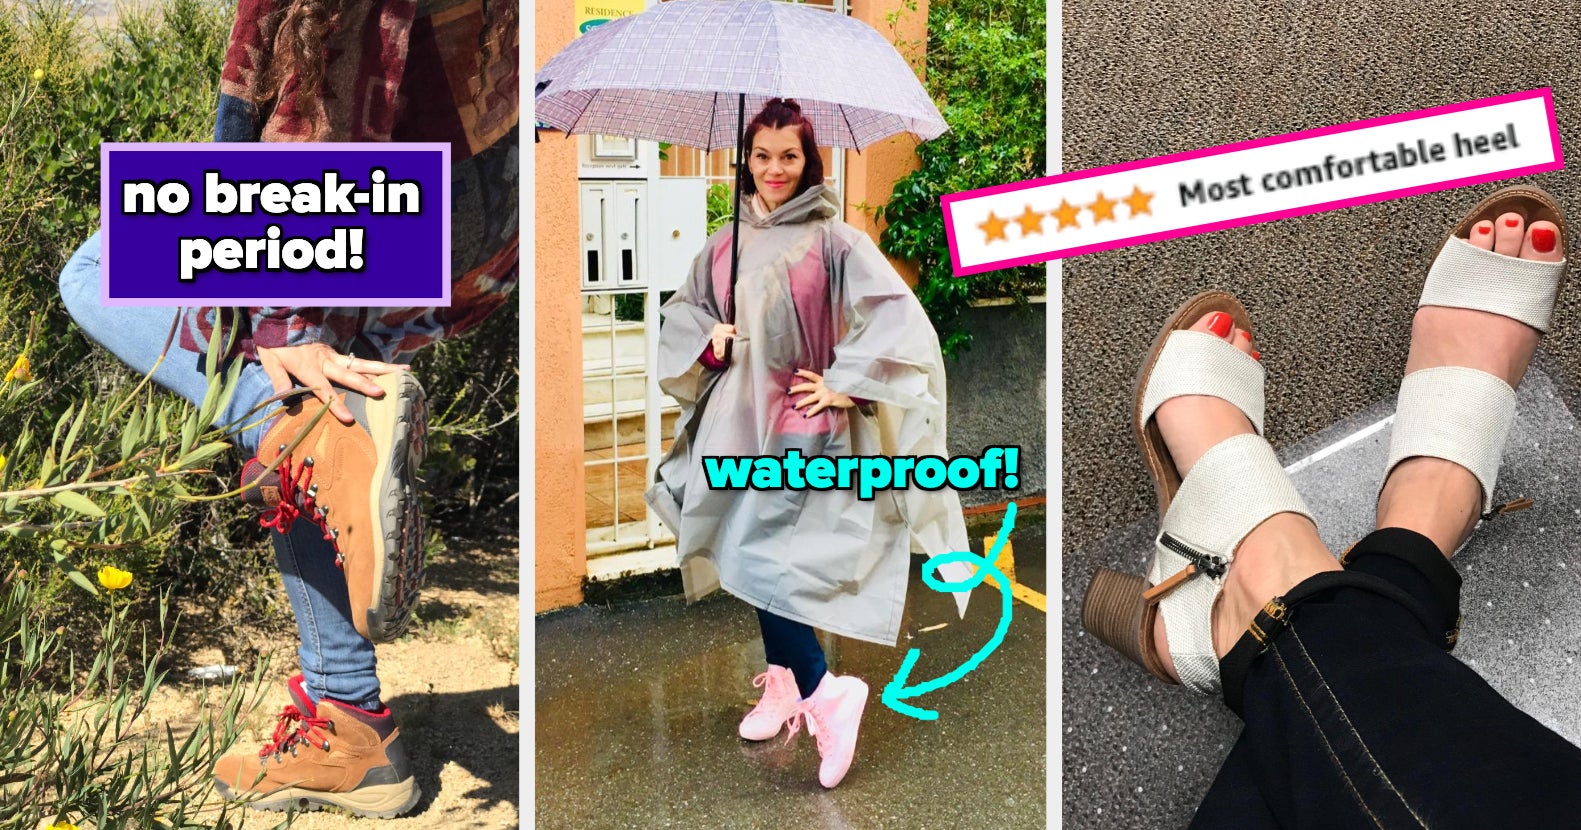 39 Shoes Great For Wearing Pretty Much Anywhere